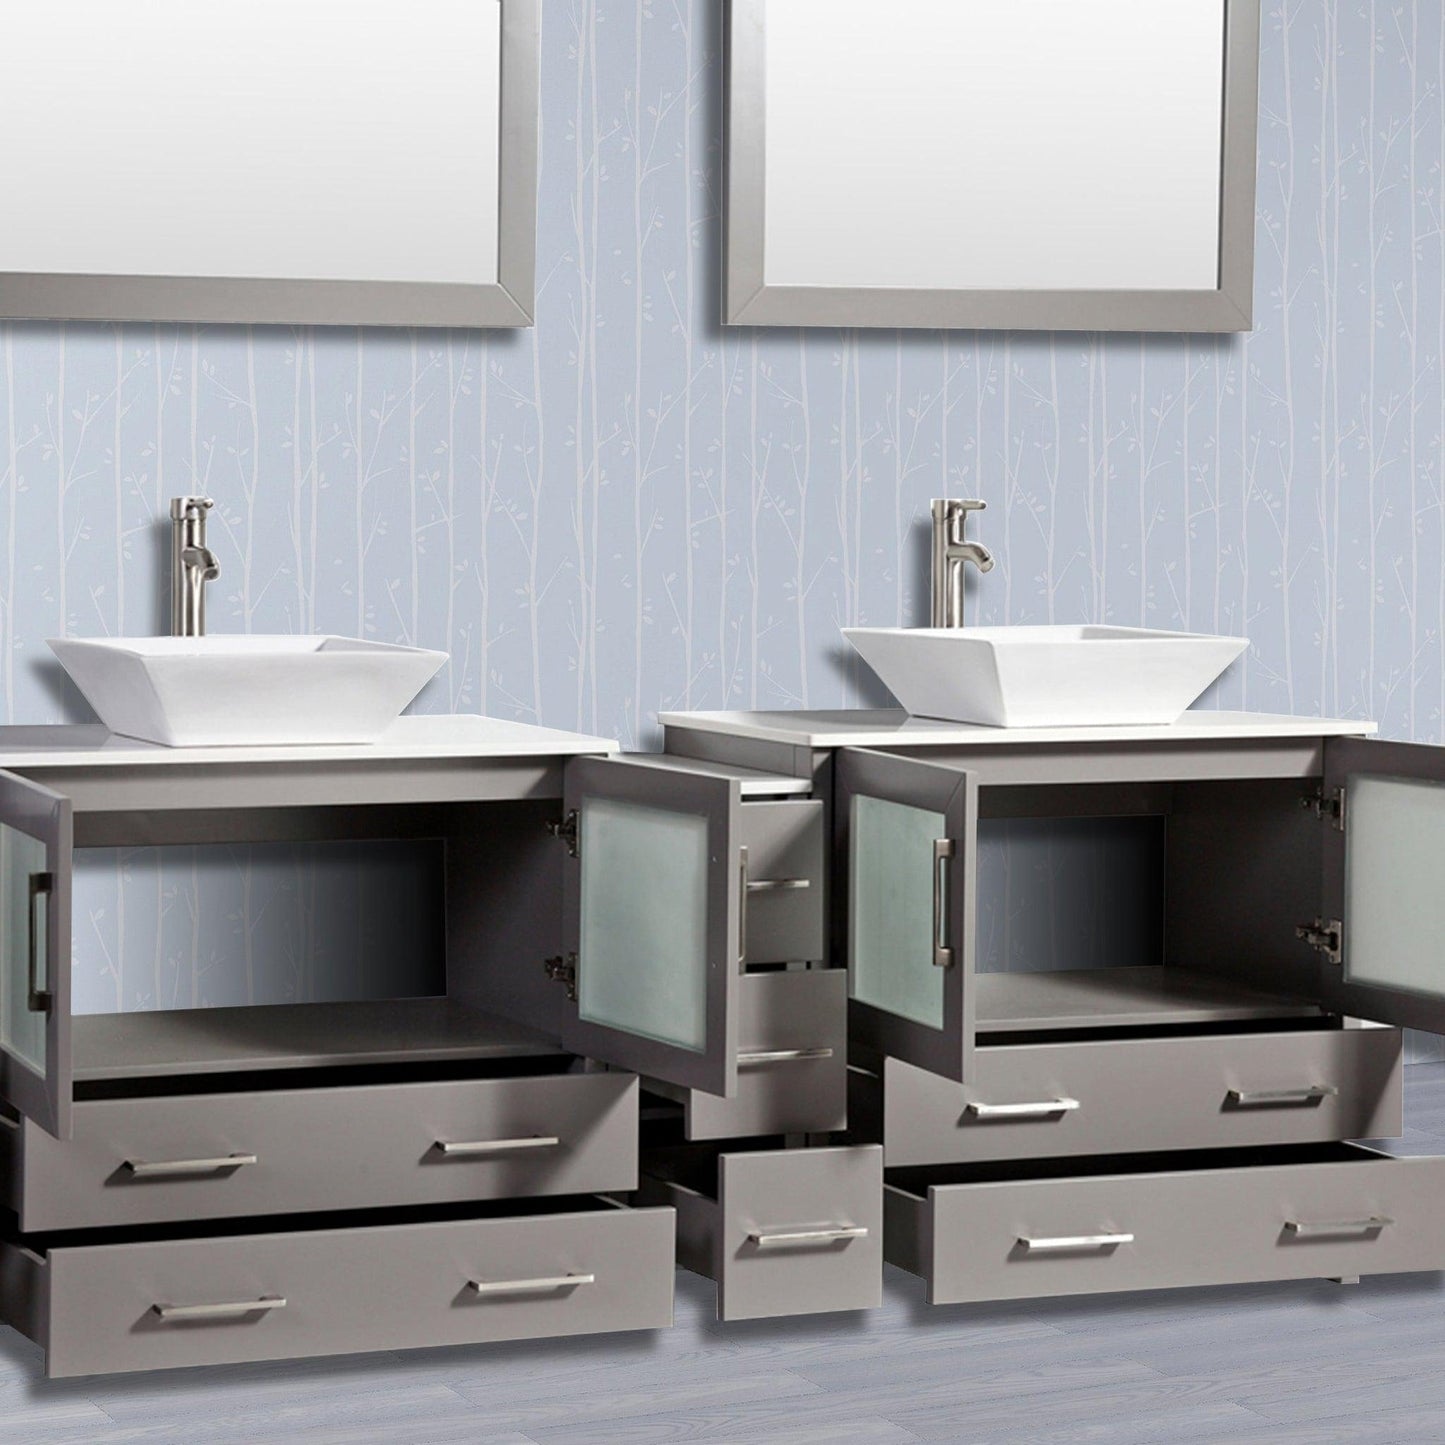 Vanity Art Ravenna 84" Double Gray Freestanding Vanity Set With White Engineered Marble Top, 2 Ceramic Vessel Sinks, 1 Side Cabinet and 2 Mirrors